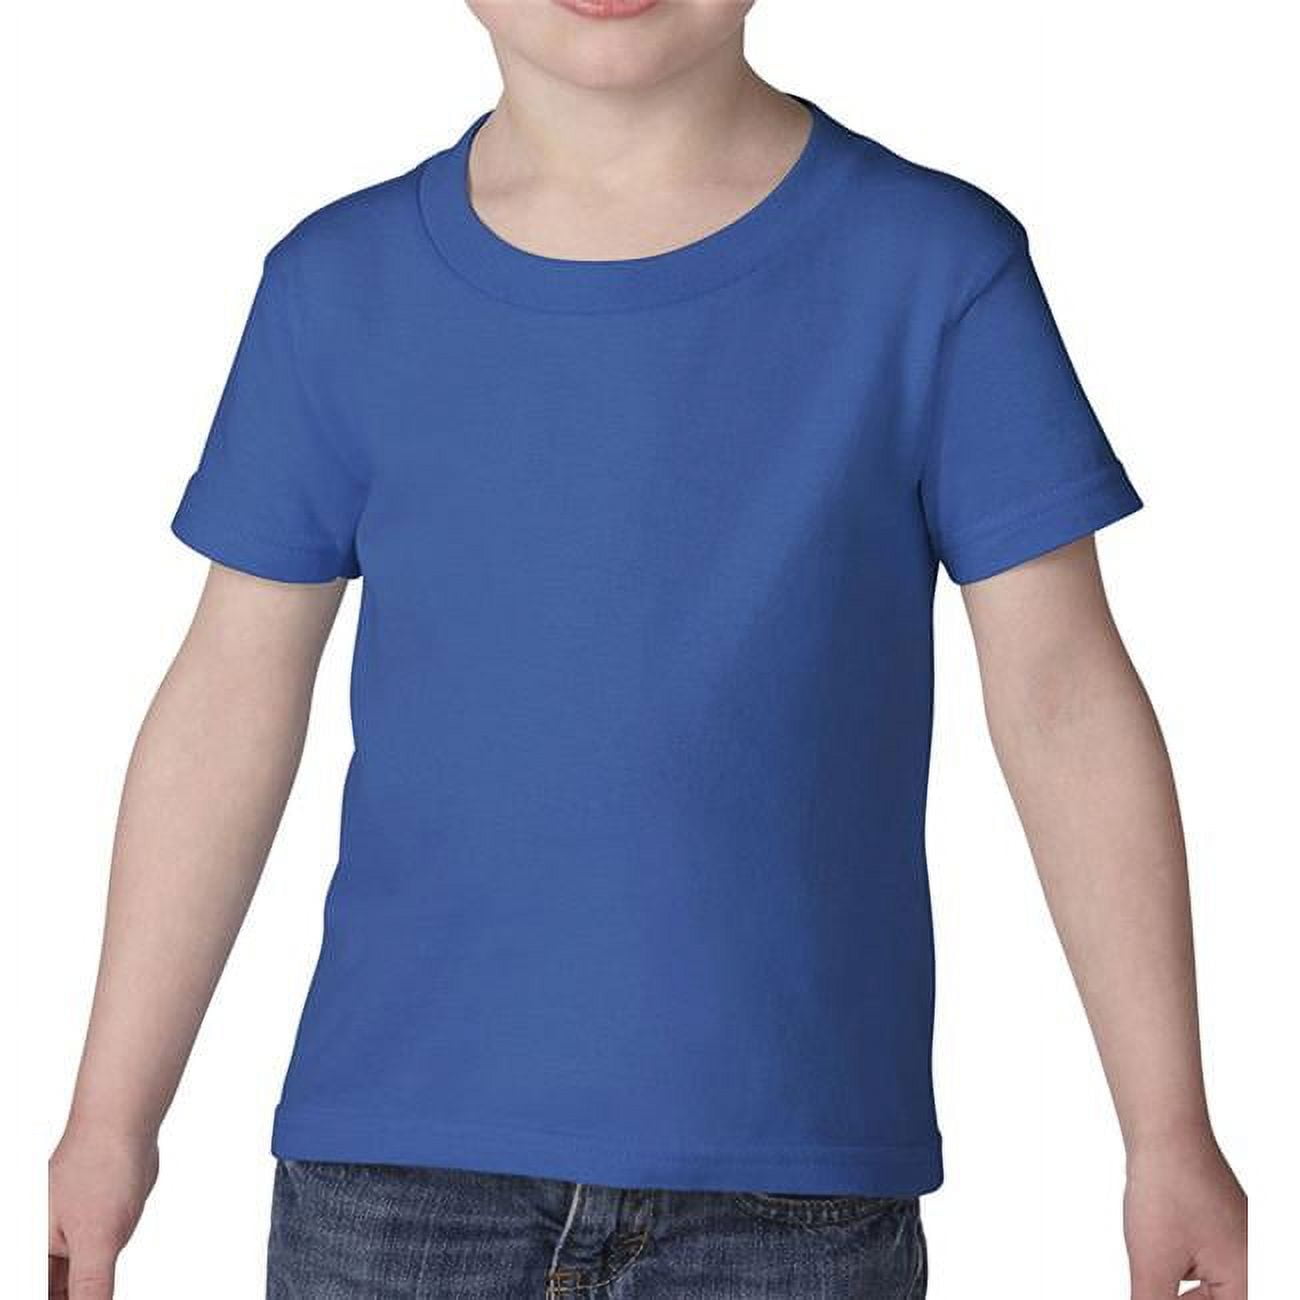 Gildan First Quality - 5100p Heavy Cotton Toddler T-shirt, Royal Blue - Large - Case Of 12